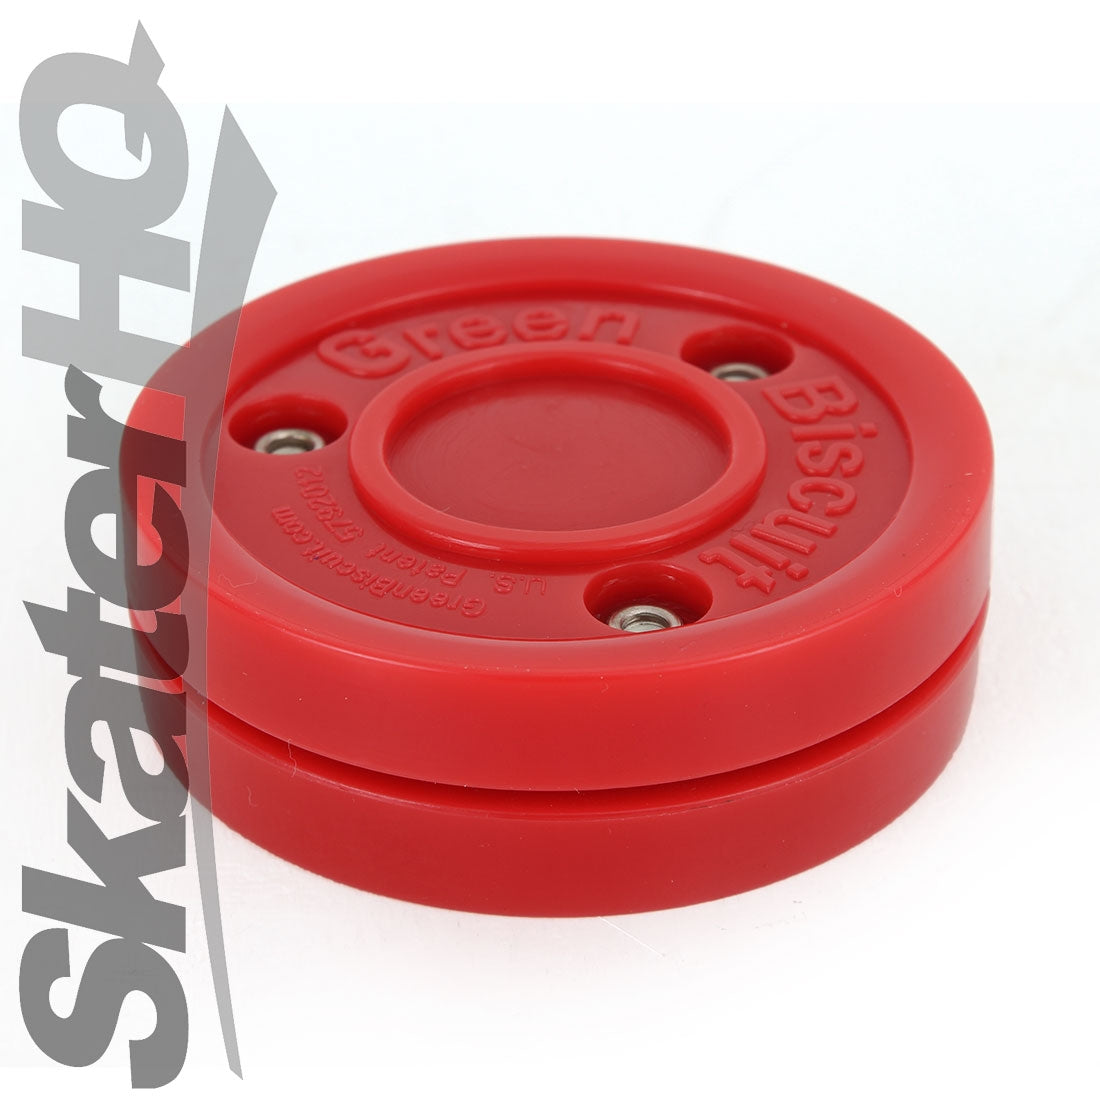 Green Biscuit Hockey Puck - Red Hockey